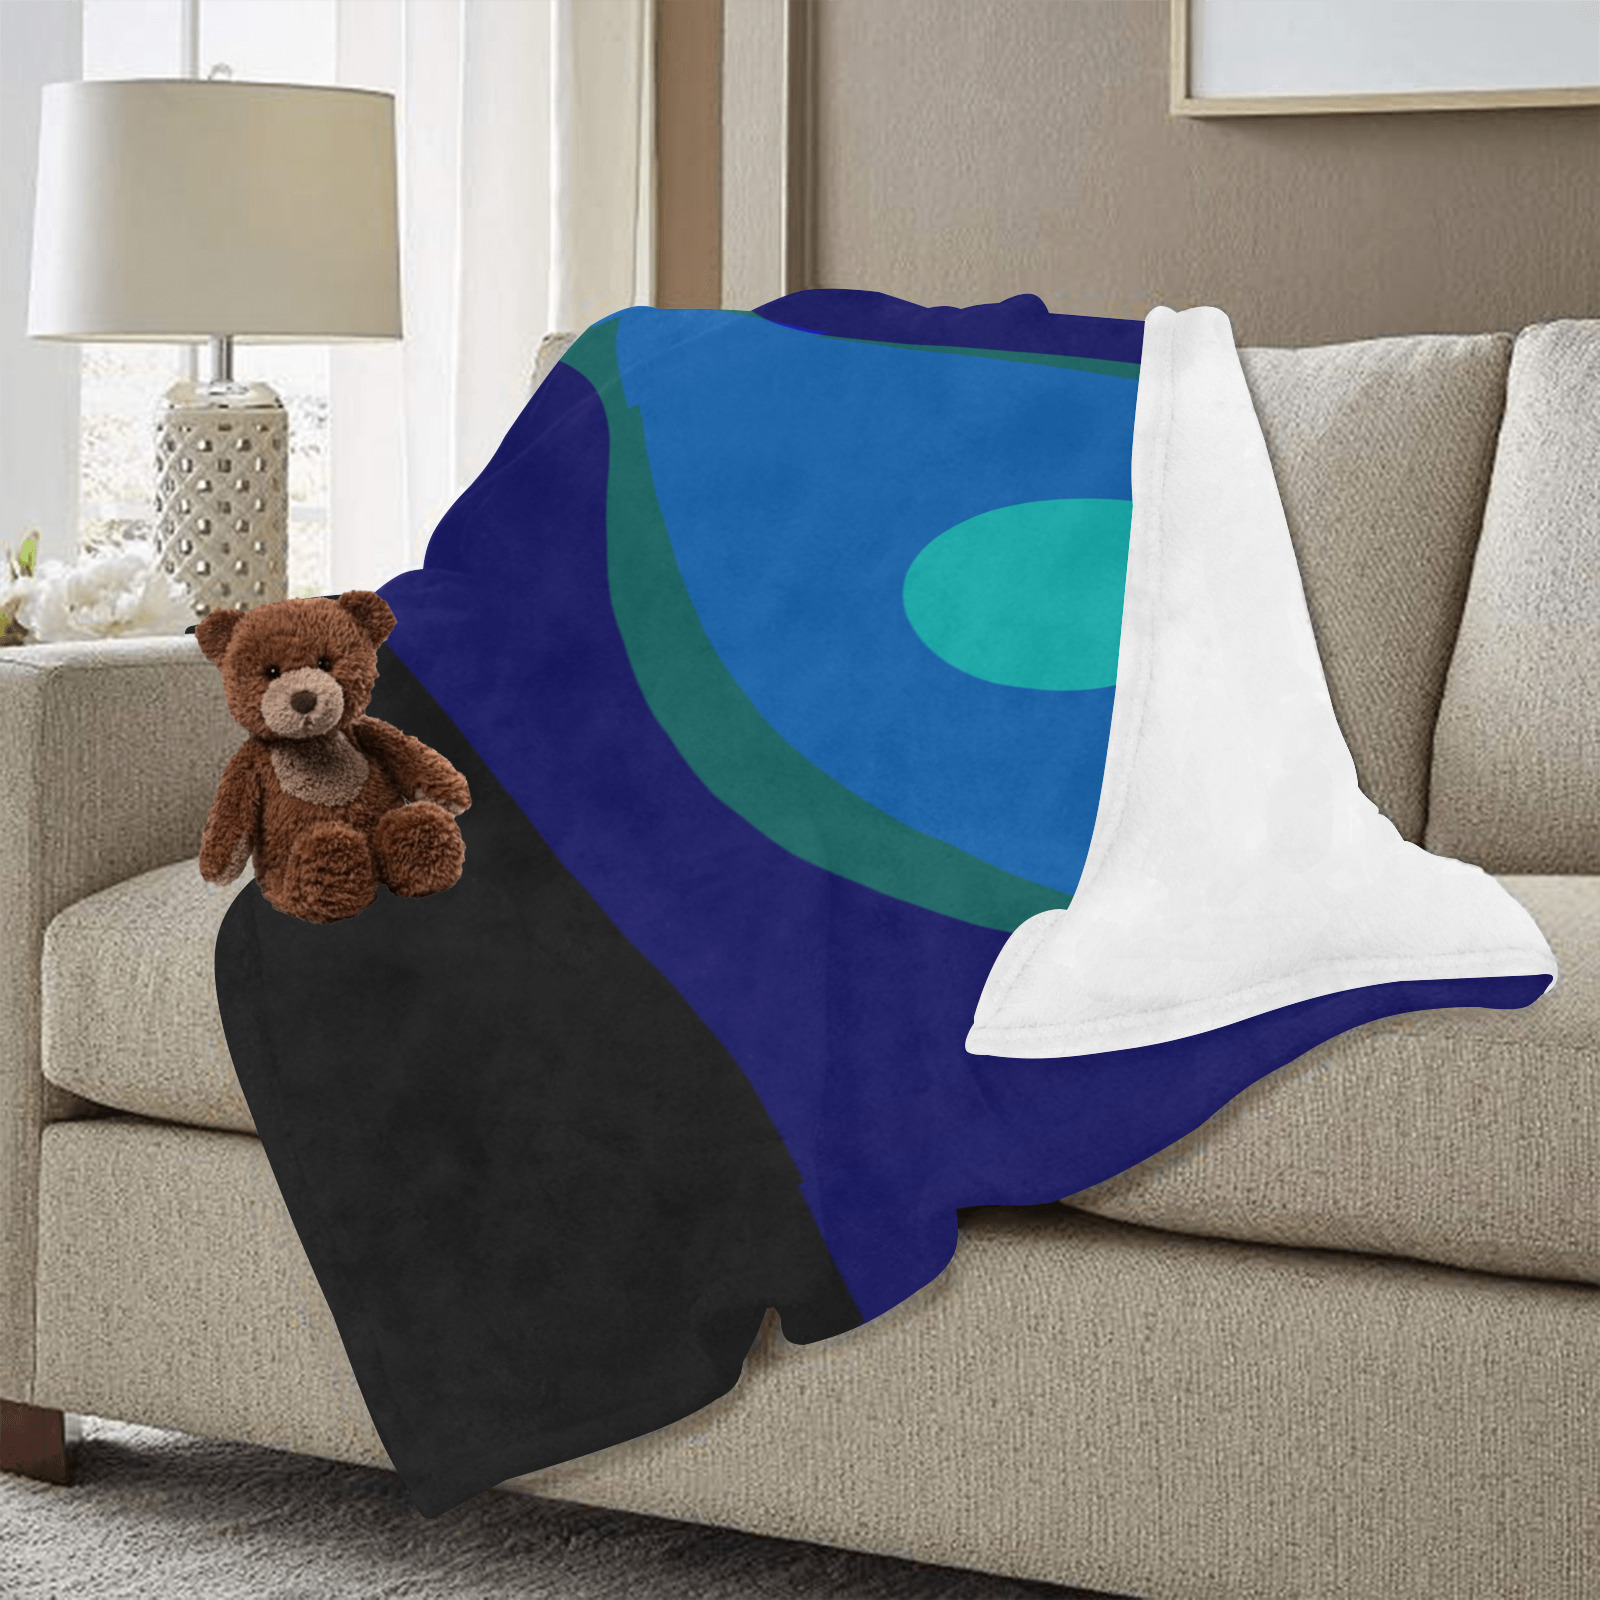 Dimensional Blue Abstract 915 Ultra-Soft Micro Fleece Blanket 60"x80" (Thick)